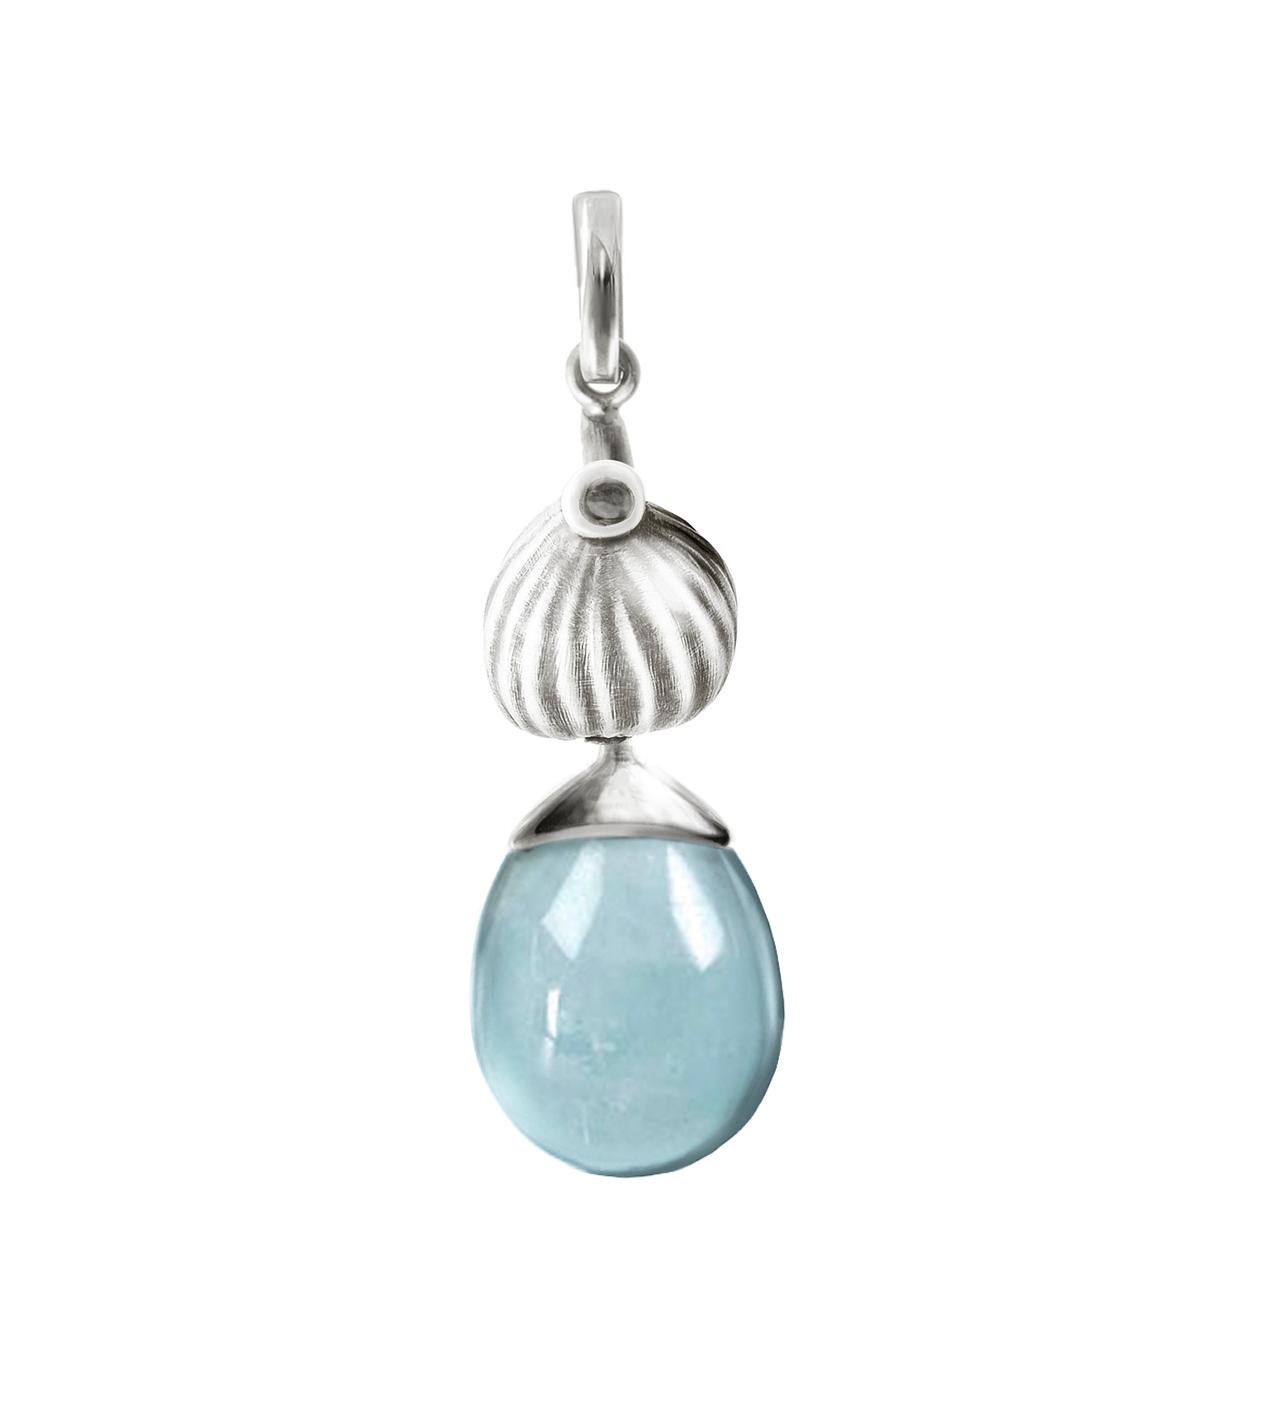 This Fig drop pendant necklace is made of 18 Karat white gold with a cabochon natural topaz. The gemstone drop is designed to let light in, adding to its beauty. This collection was featured in Vogue UA. The necklace has a length of approximately